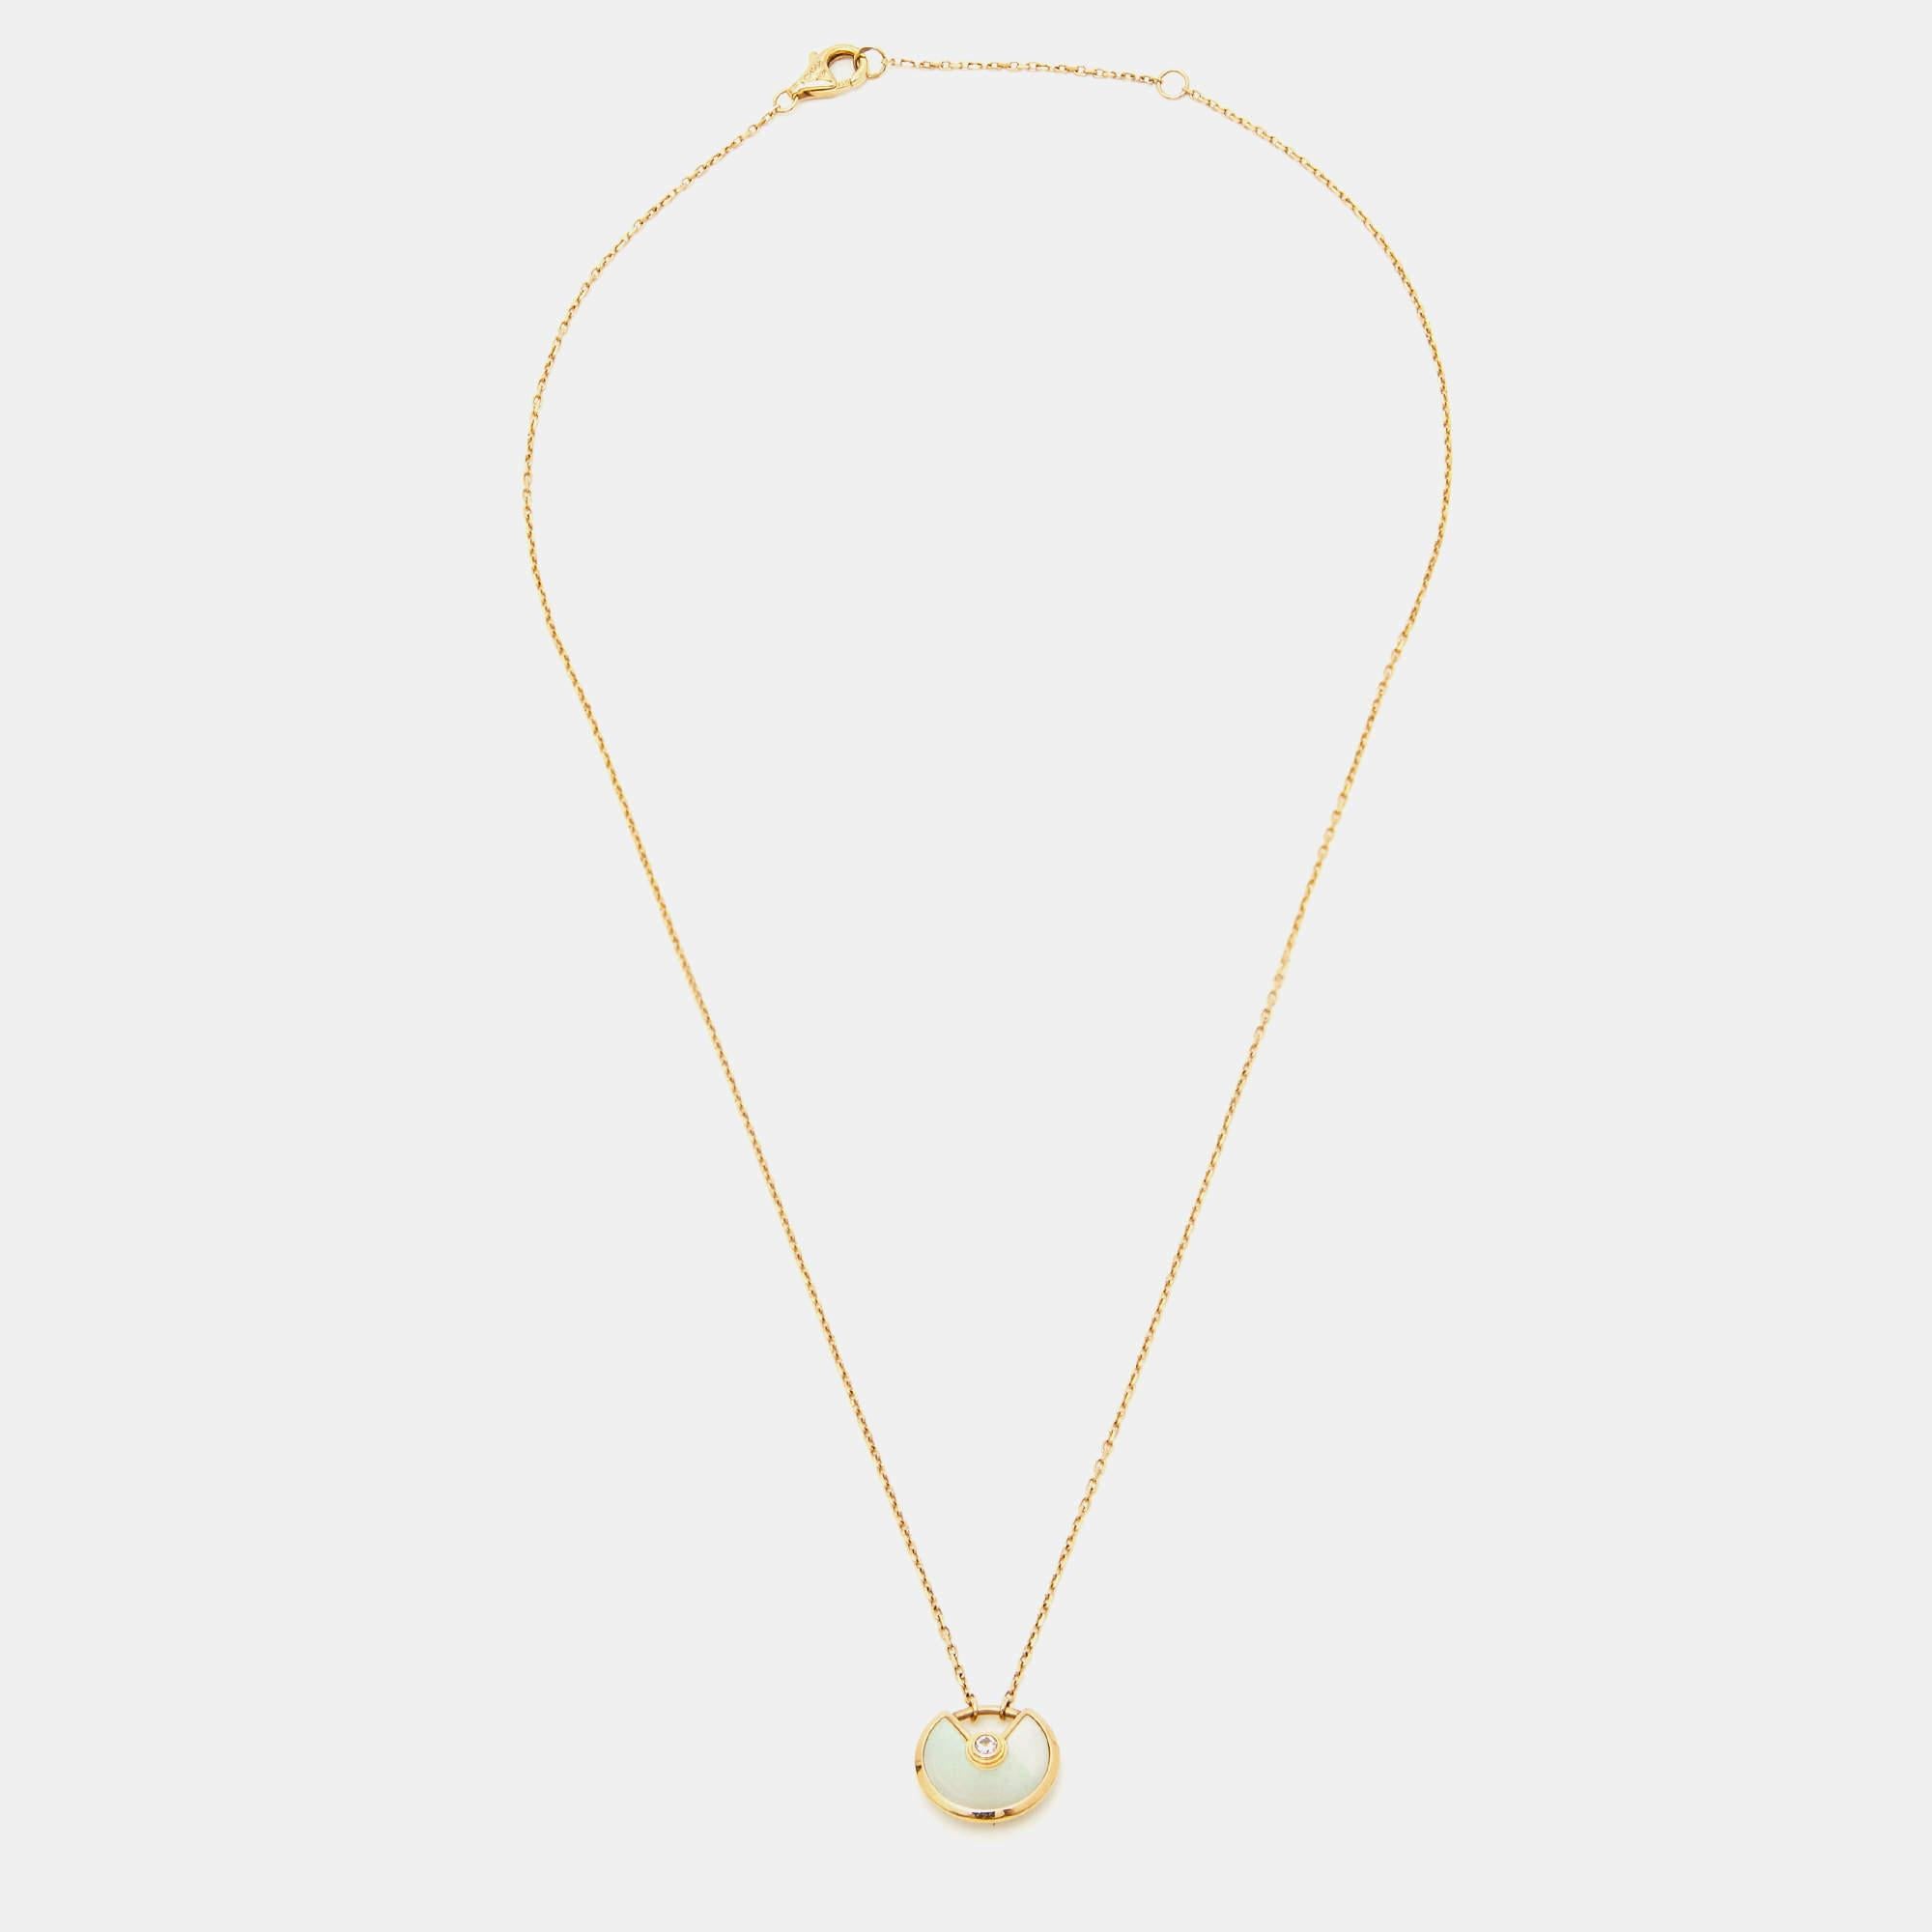 The Cartier Amulette De Cartier necklace is an exquisite piece of jewelry. Crafted in 18k yellow gold, it features a mother of pearl pendant adorned with a single dazzling diamond. The delicate design exudes elegance and sophistication, making it a